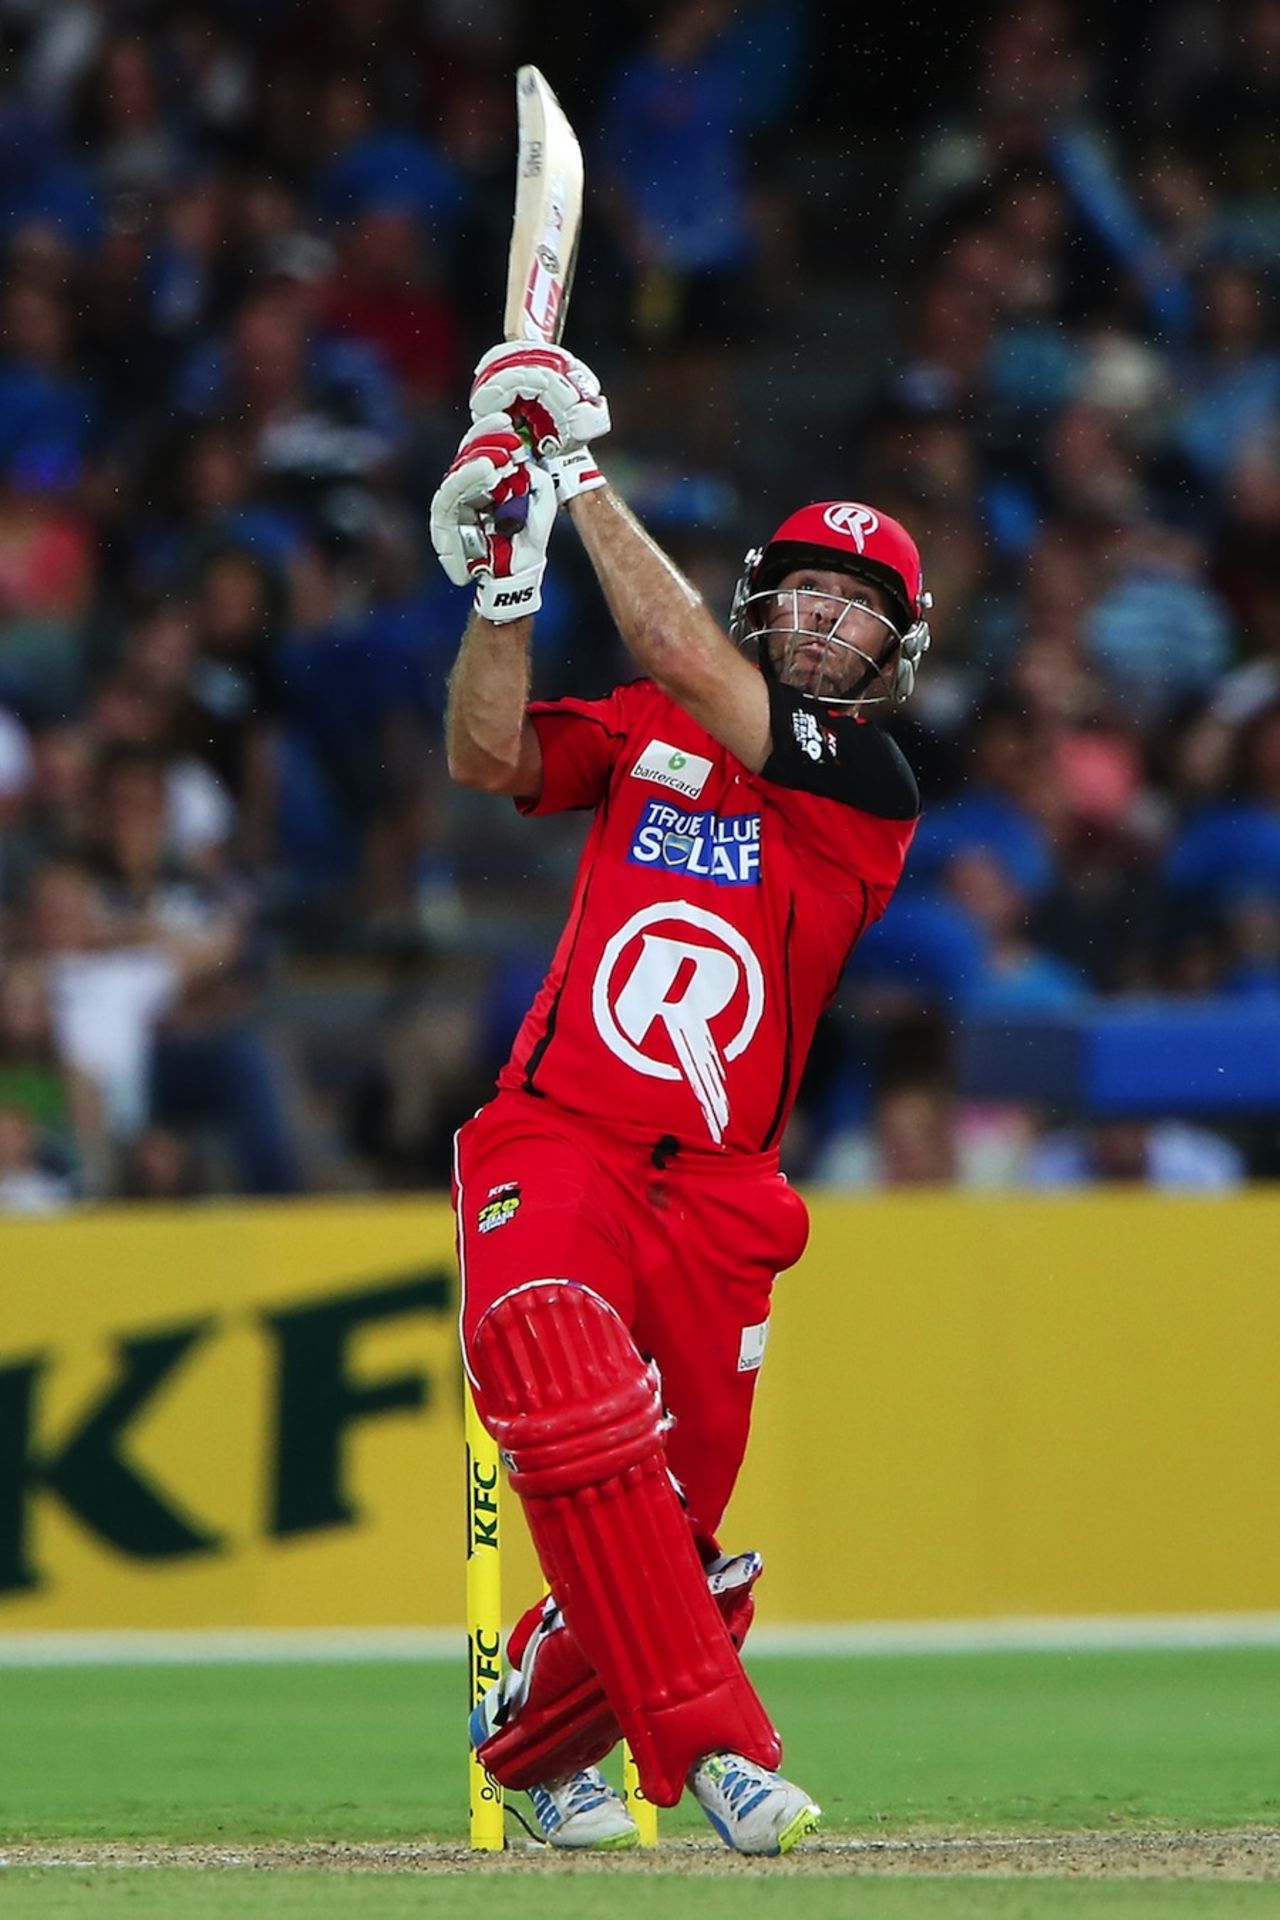 Ben Rohrer takes the aerial route, Adelaide Strikers v Melbourne Renegades, Big Bash League, Adelaide, January 22, 2014